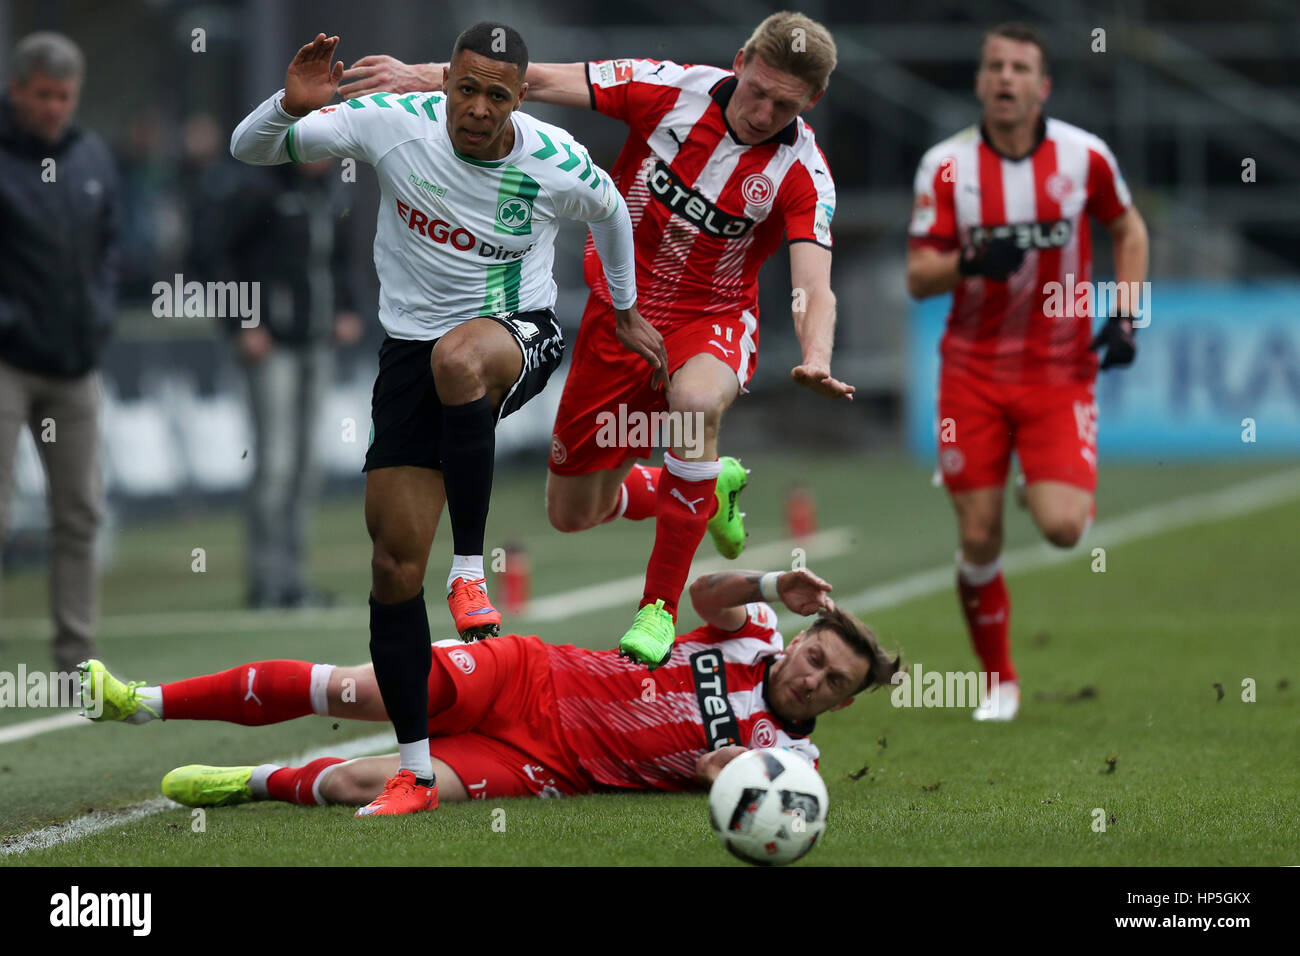 Fuerth, Germany. 18th Feb, 2017. Fuerth's Mathis Bolly (L) in action against Duesseldorf's Adam Bodzek (bottom) and Axel Bellinghausen (C) during the German second division Bundesliga soccer match between SpVgg Greuther Fürth and Fortuna Duesseldorf at Sportpark Ronhof Thomas Sommer in Fuerth, Germany, 18 February 2017. (EMBARGO CONDITIONS - ATTENTION: Due to the accreditation guidelines, the DFL only permits the publication and utilisation of up to 15 pictures per match on the internet and in online media during the match.) Photo: Daniel Karmann/dpa/Alamy Live News Stock Photo